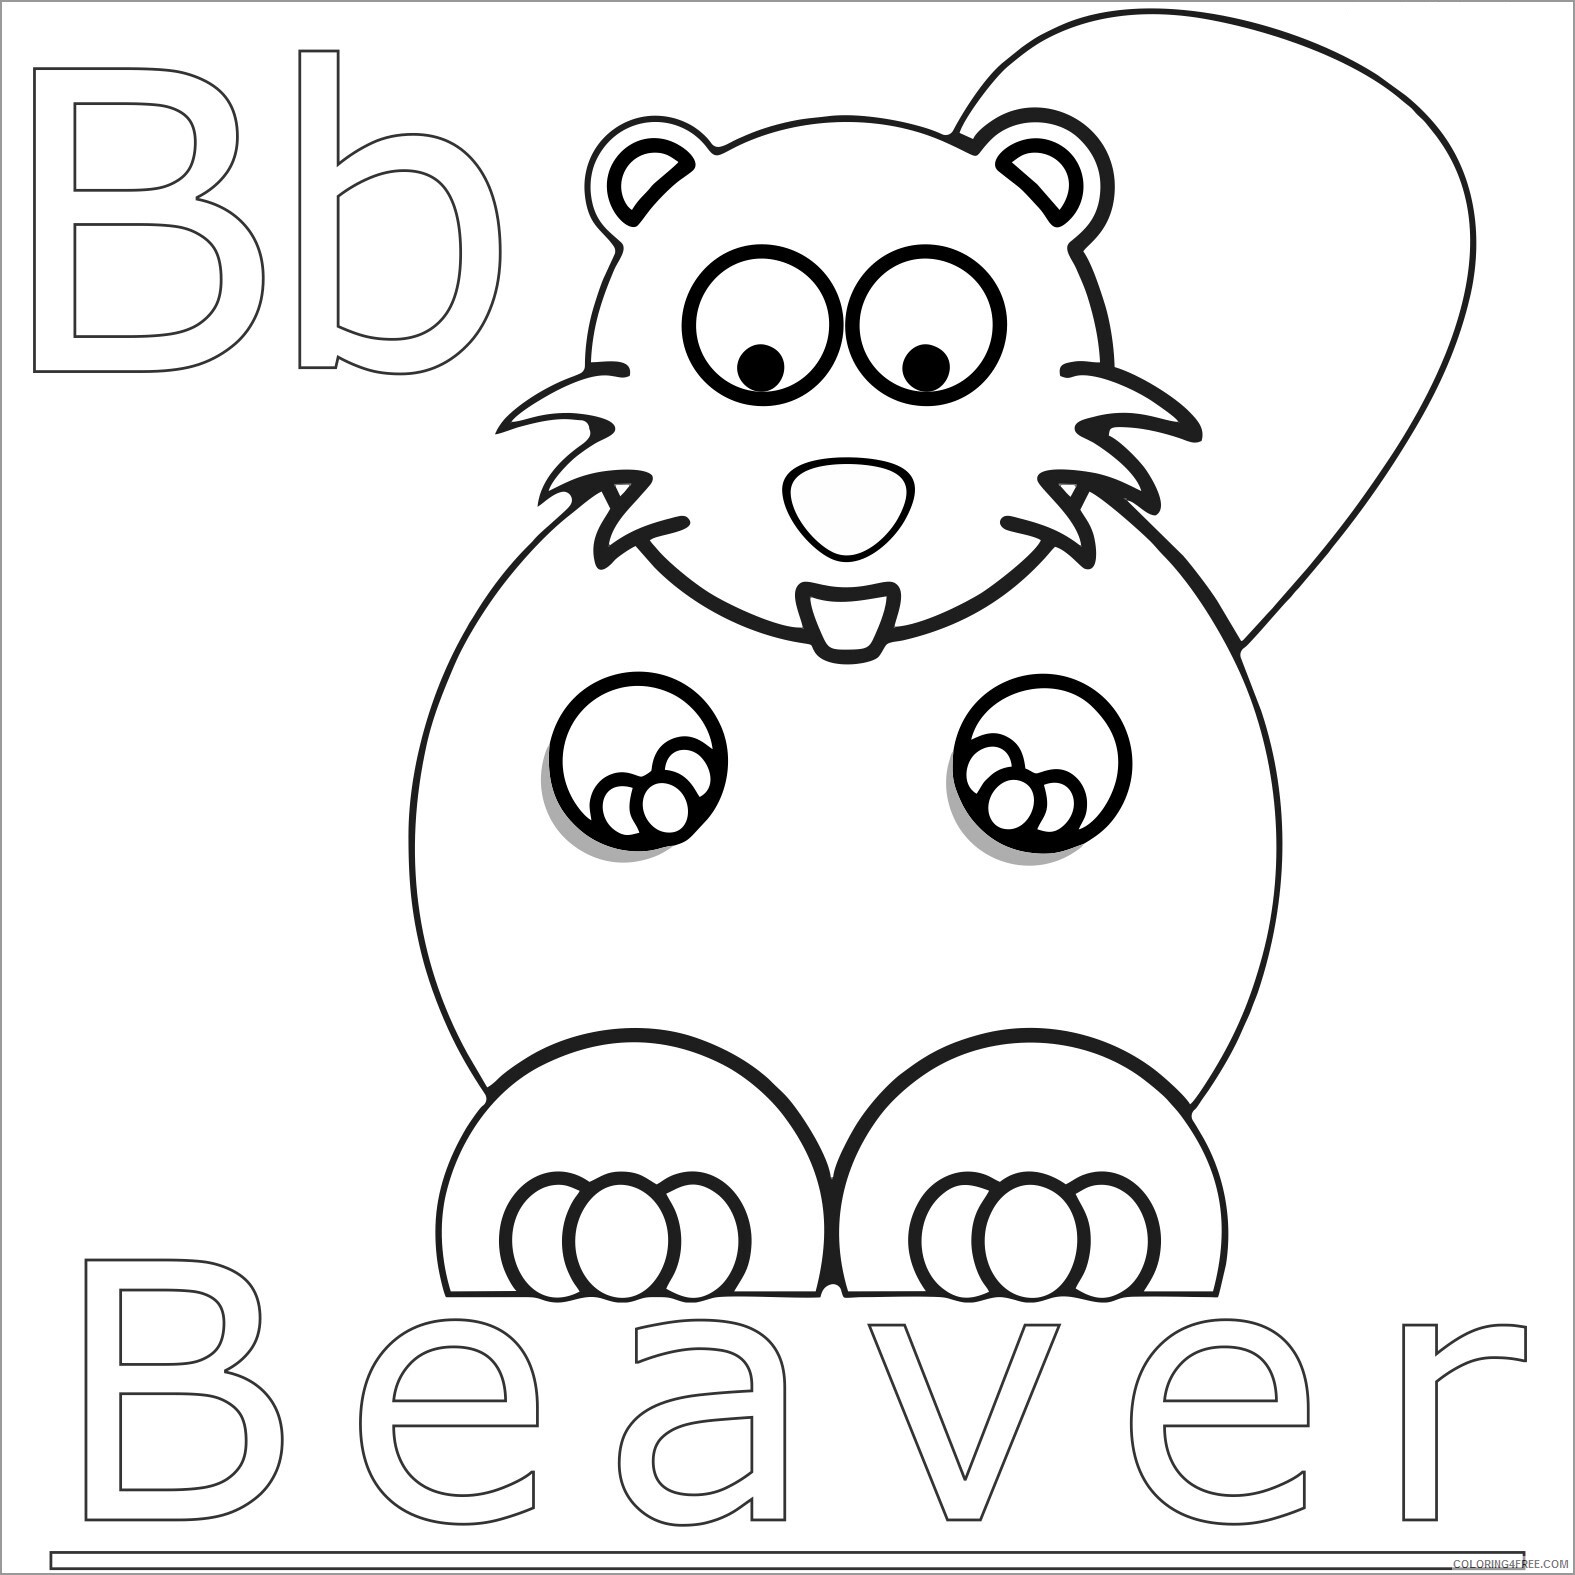 Beaver Coloring Pages Animal Printable Sheets b is for beaver 2021 0352 Coloring4free